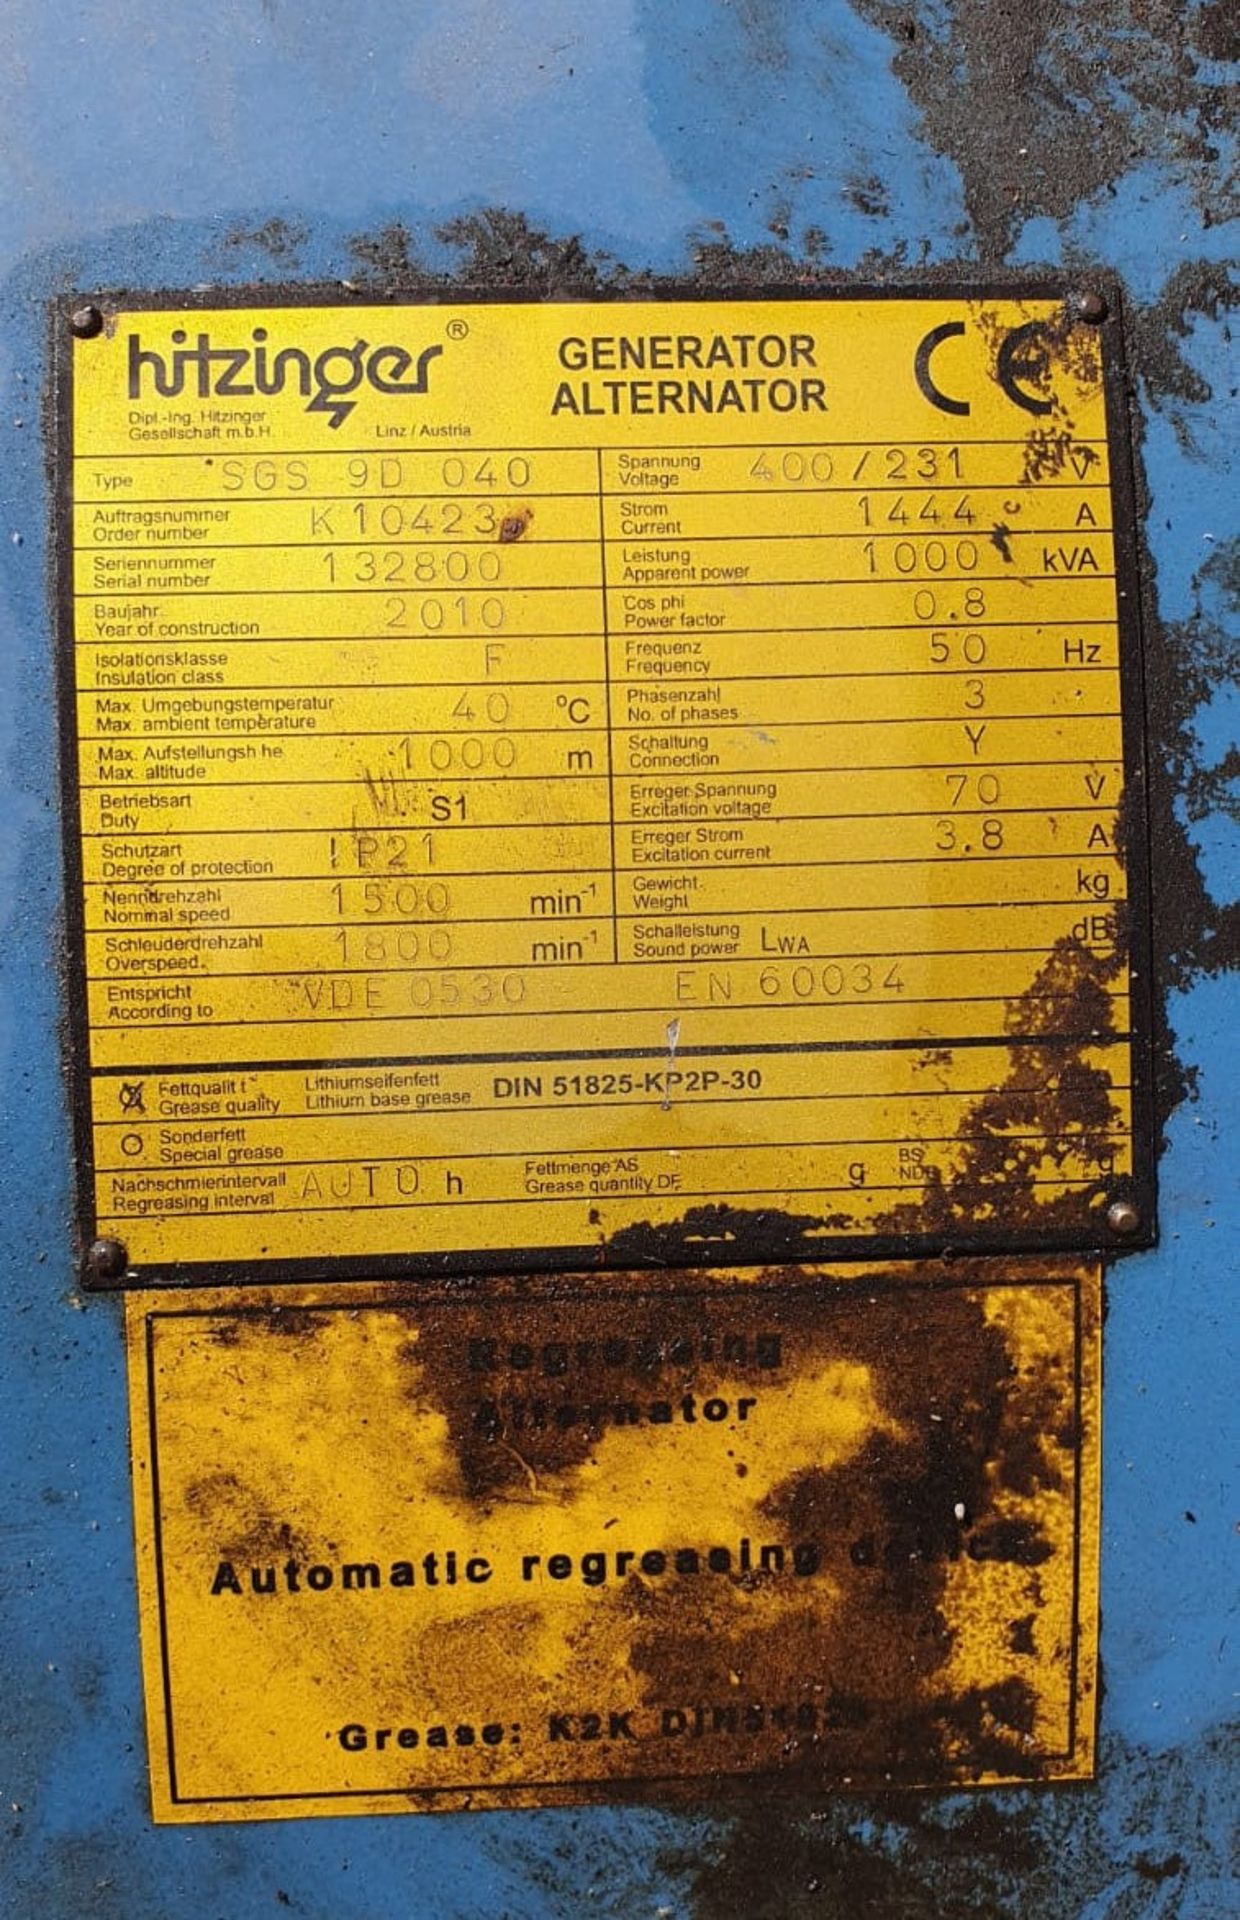 1 x 1987 Hitzinger SGS 9D 040 Generator - Only 800 Hours Use - Ref: T4UB/HZ - CL333 - Location: - Image 8 of 20